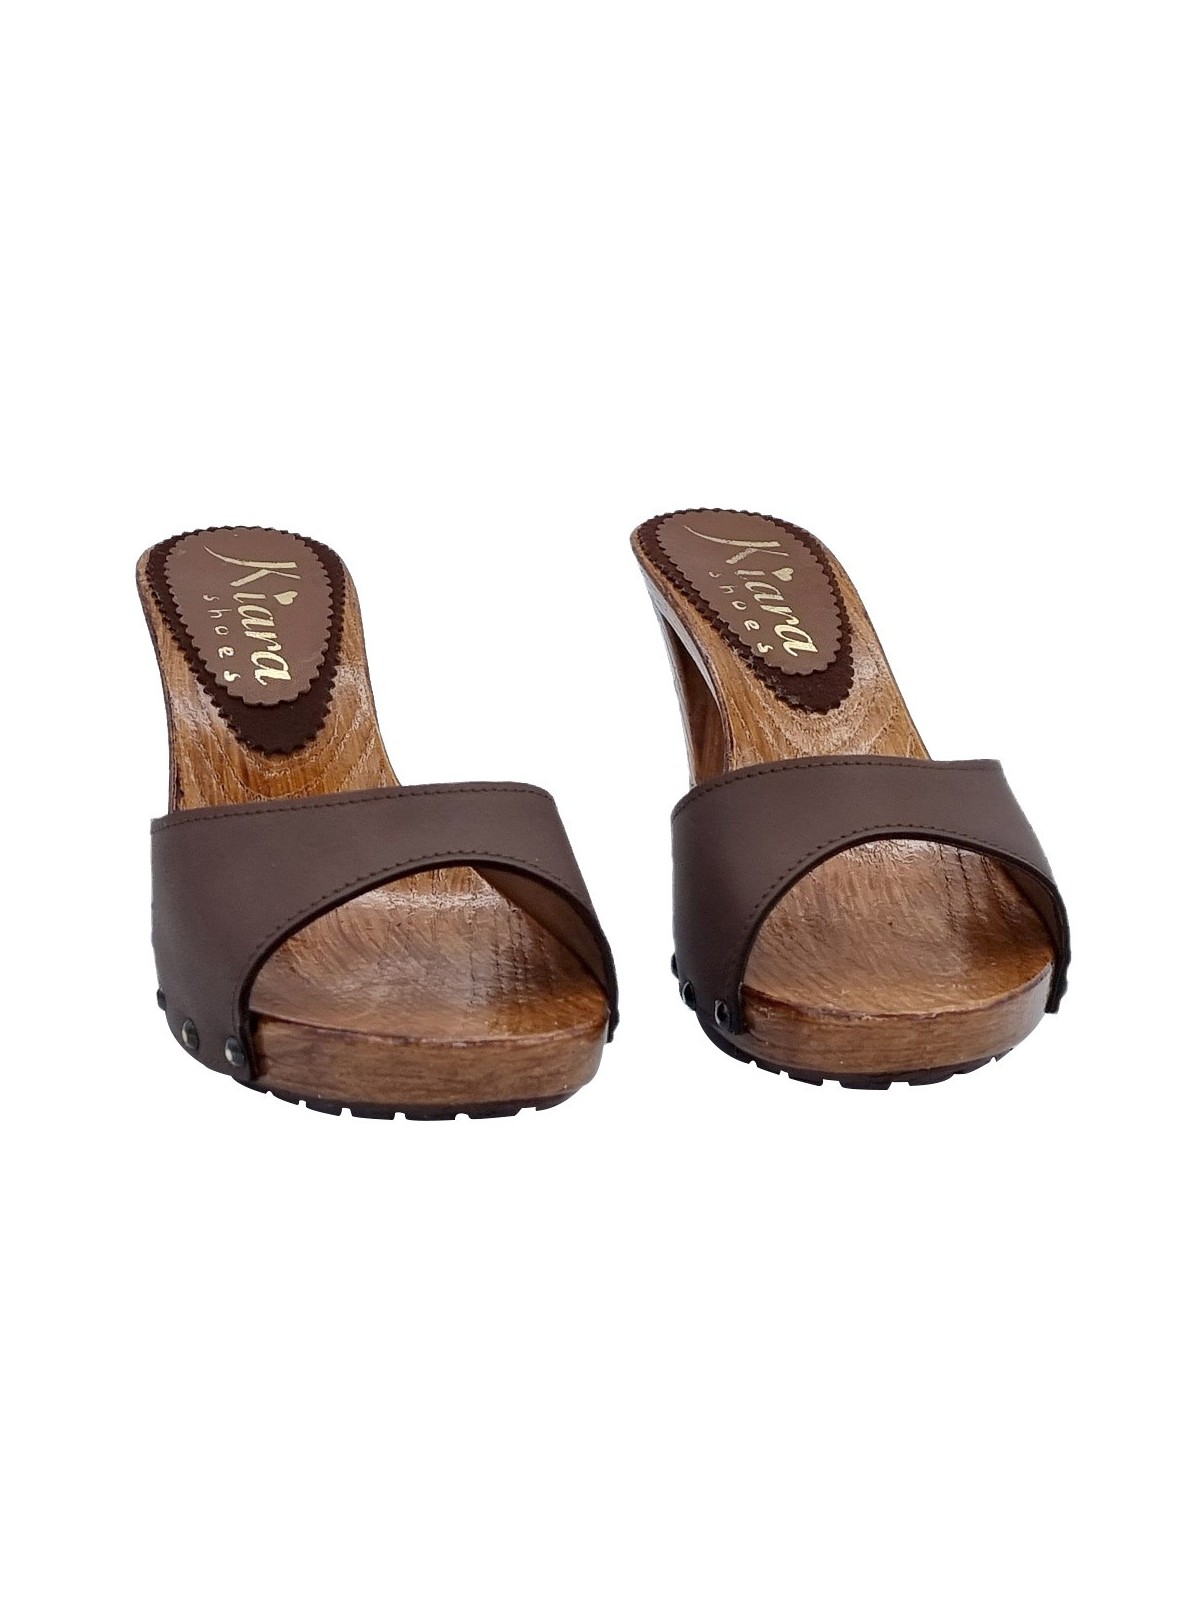 BROWN LEATHER CLOGS WITH HEEL 7.5